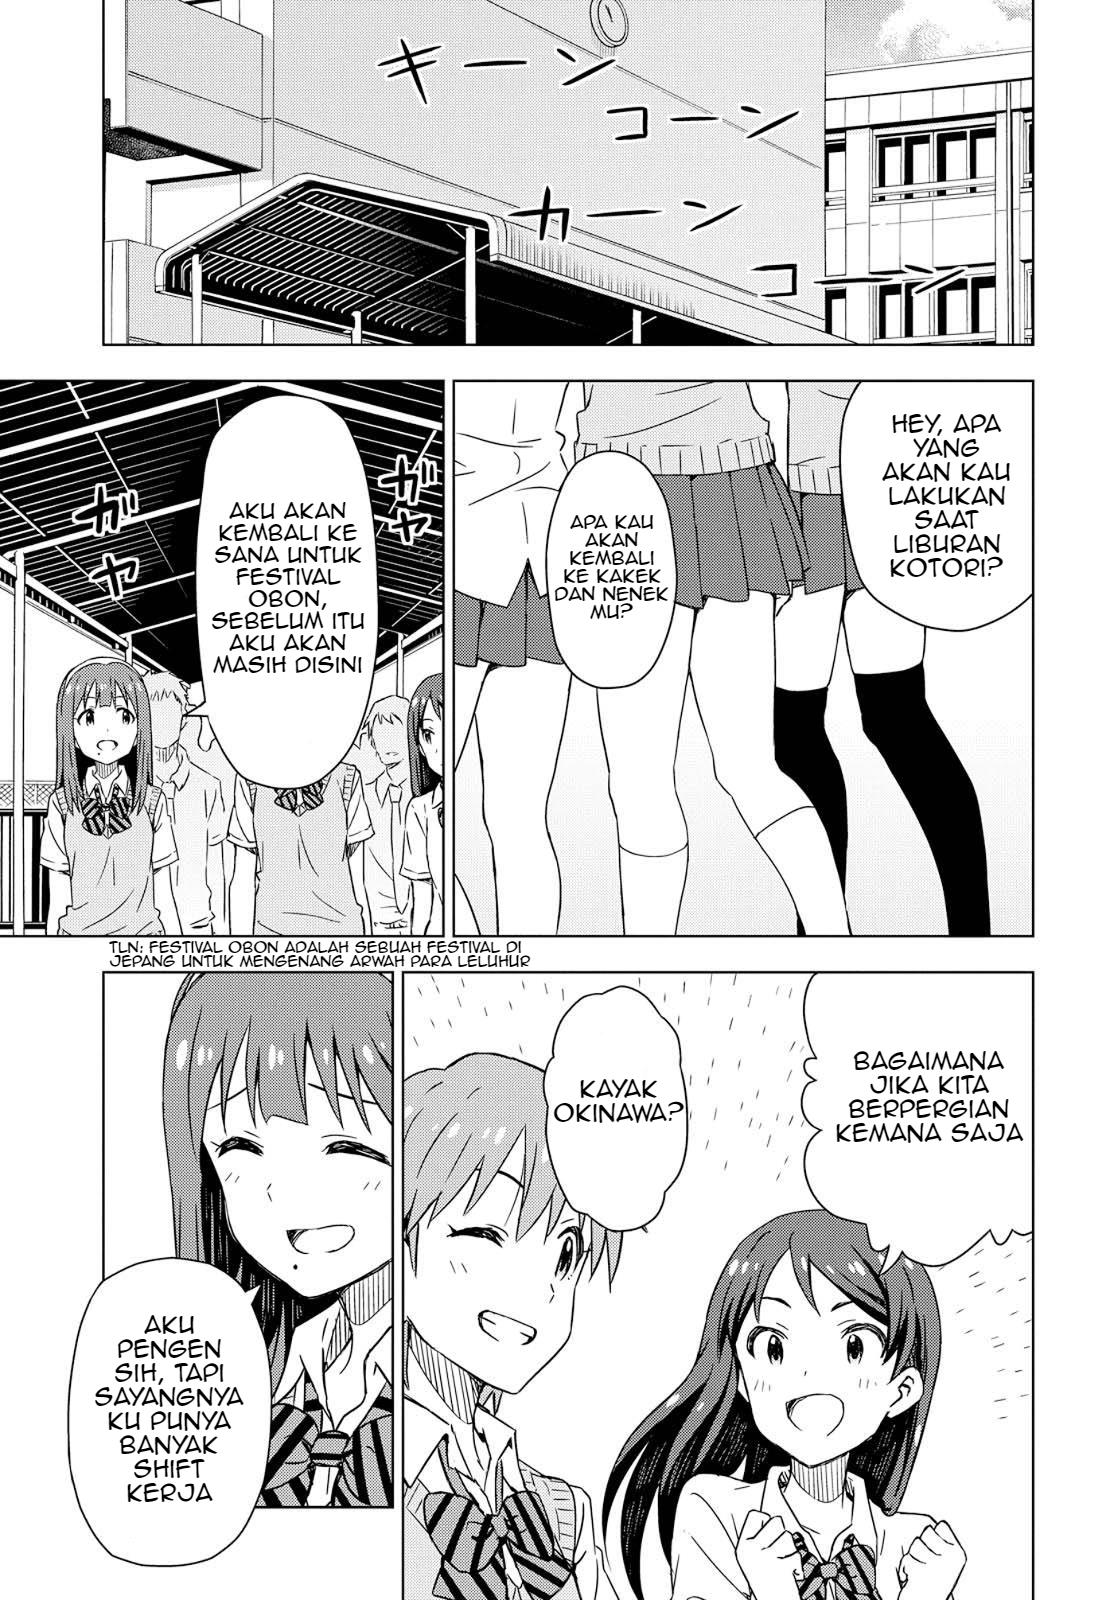 Morning Glow is Golden: The IDOLM@STER Chapter 6.2